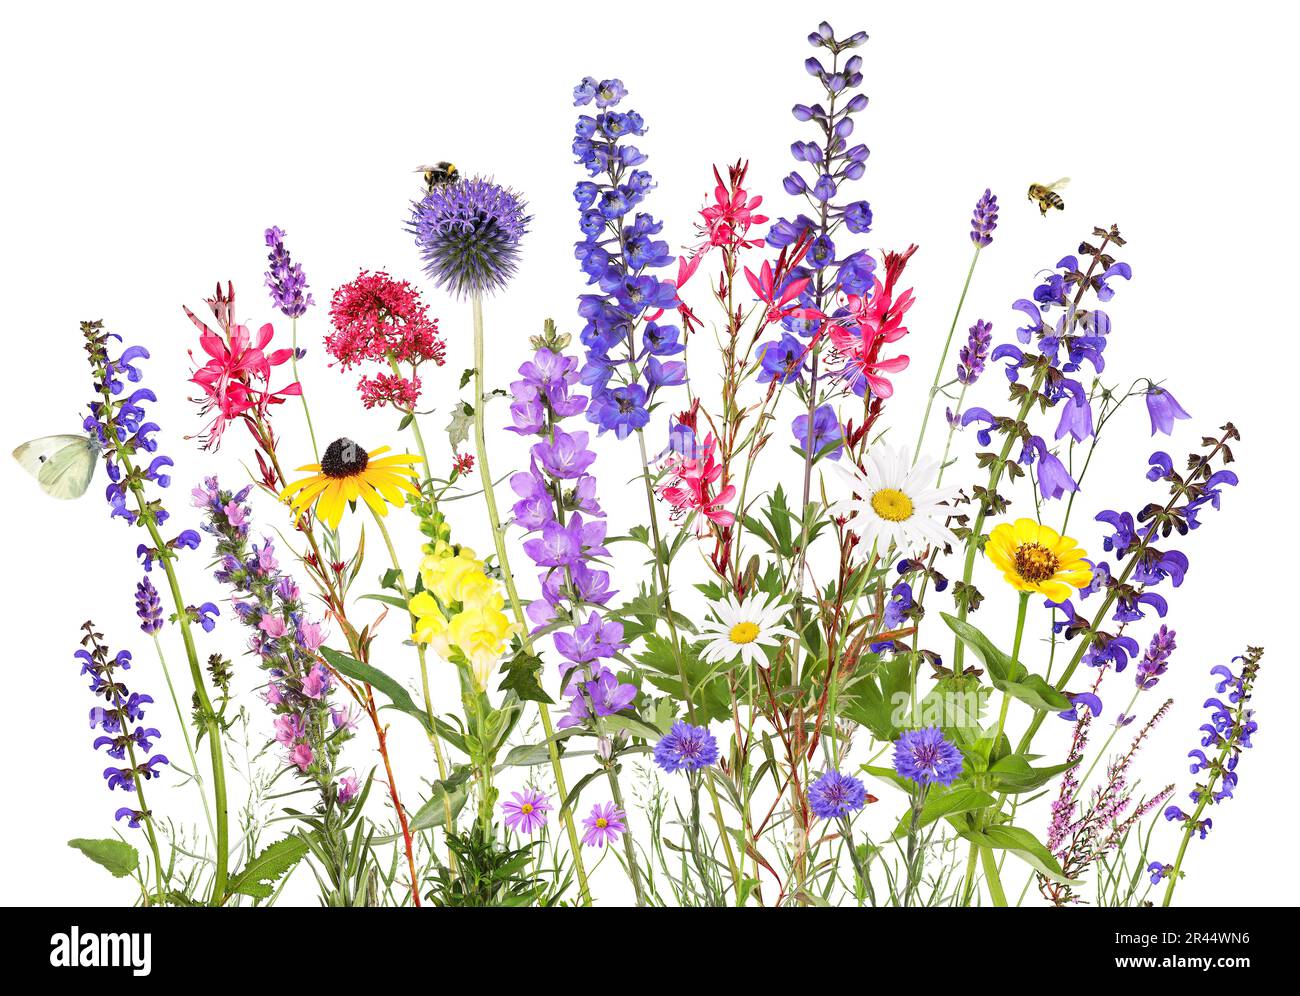 Colorful garden flowers with insects, isolated background Stock Photo